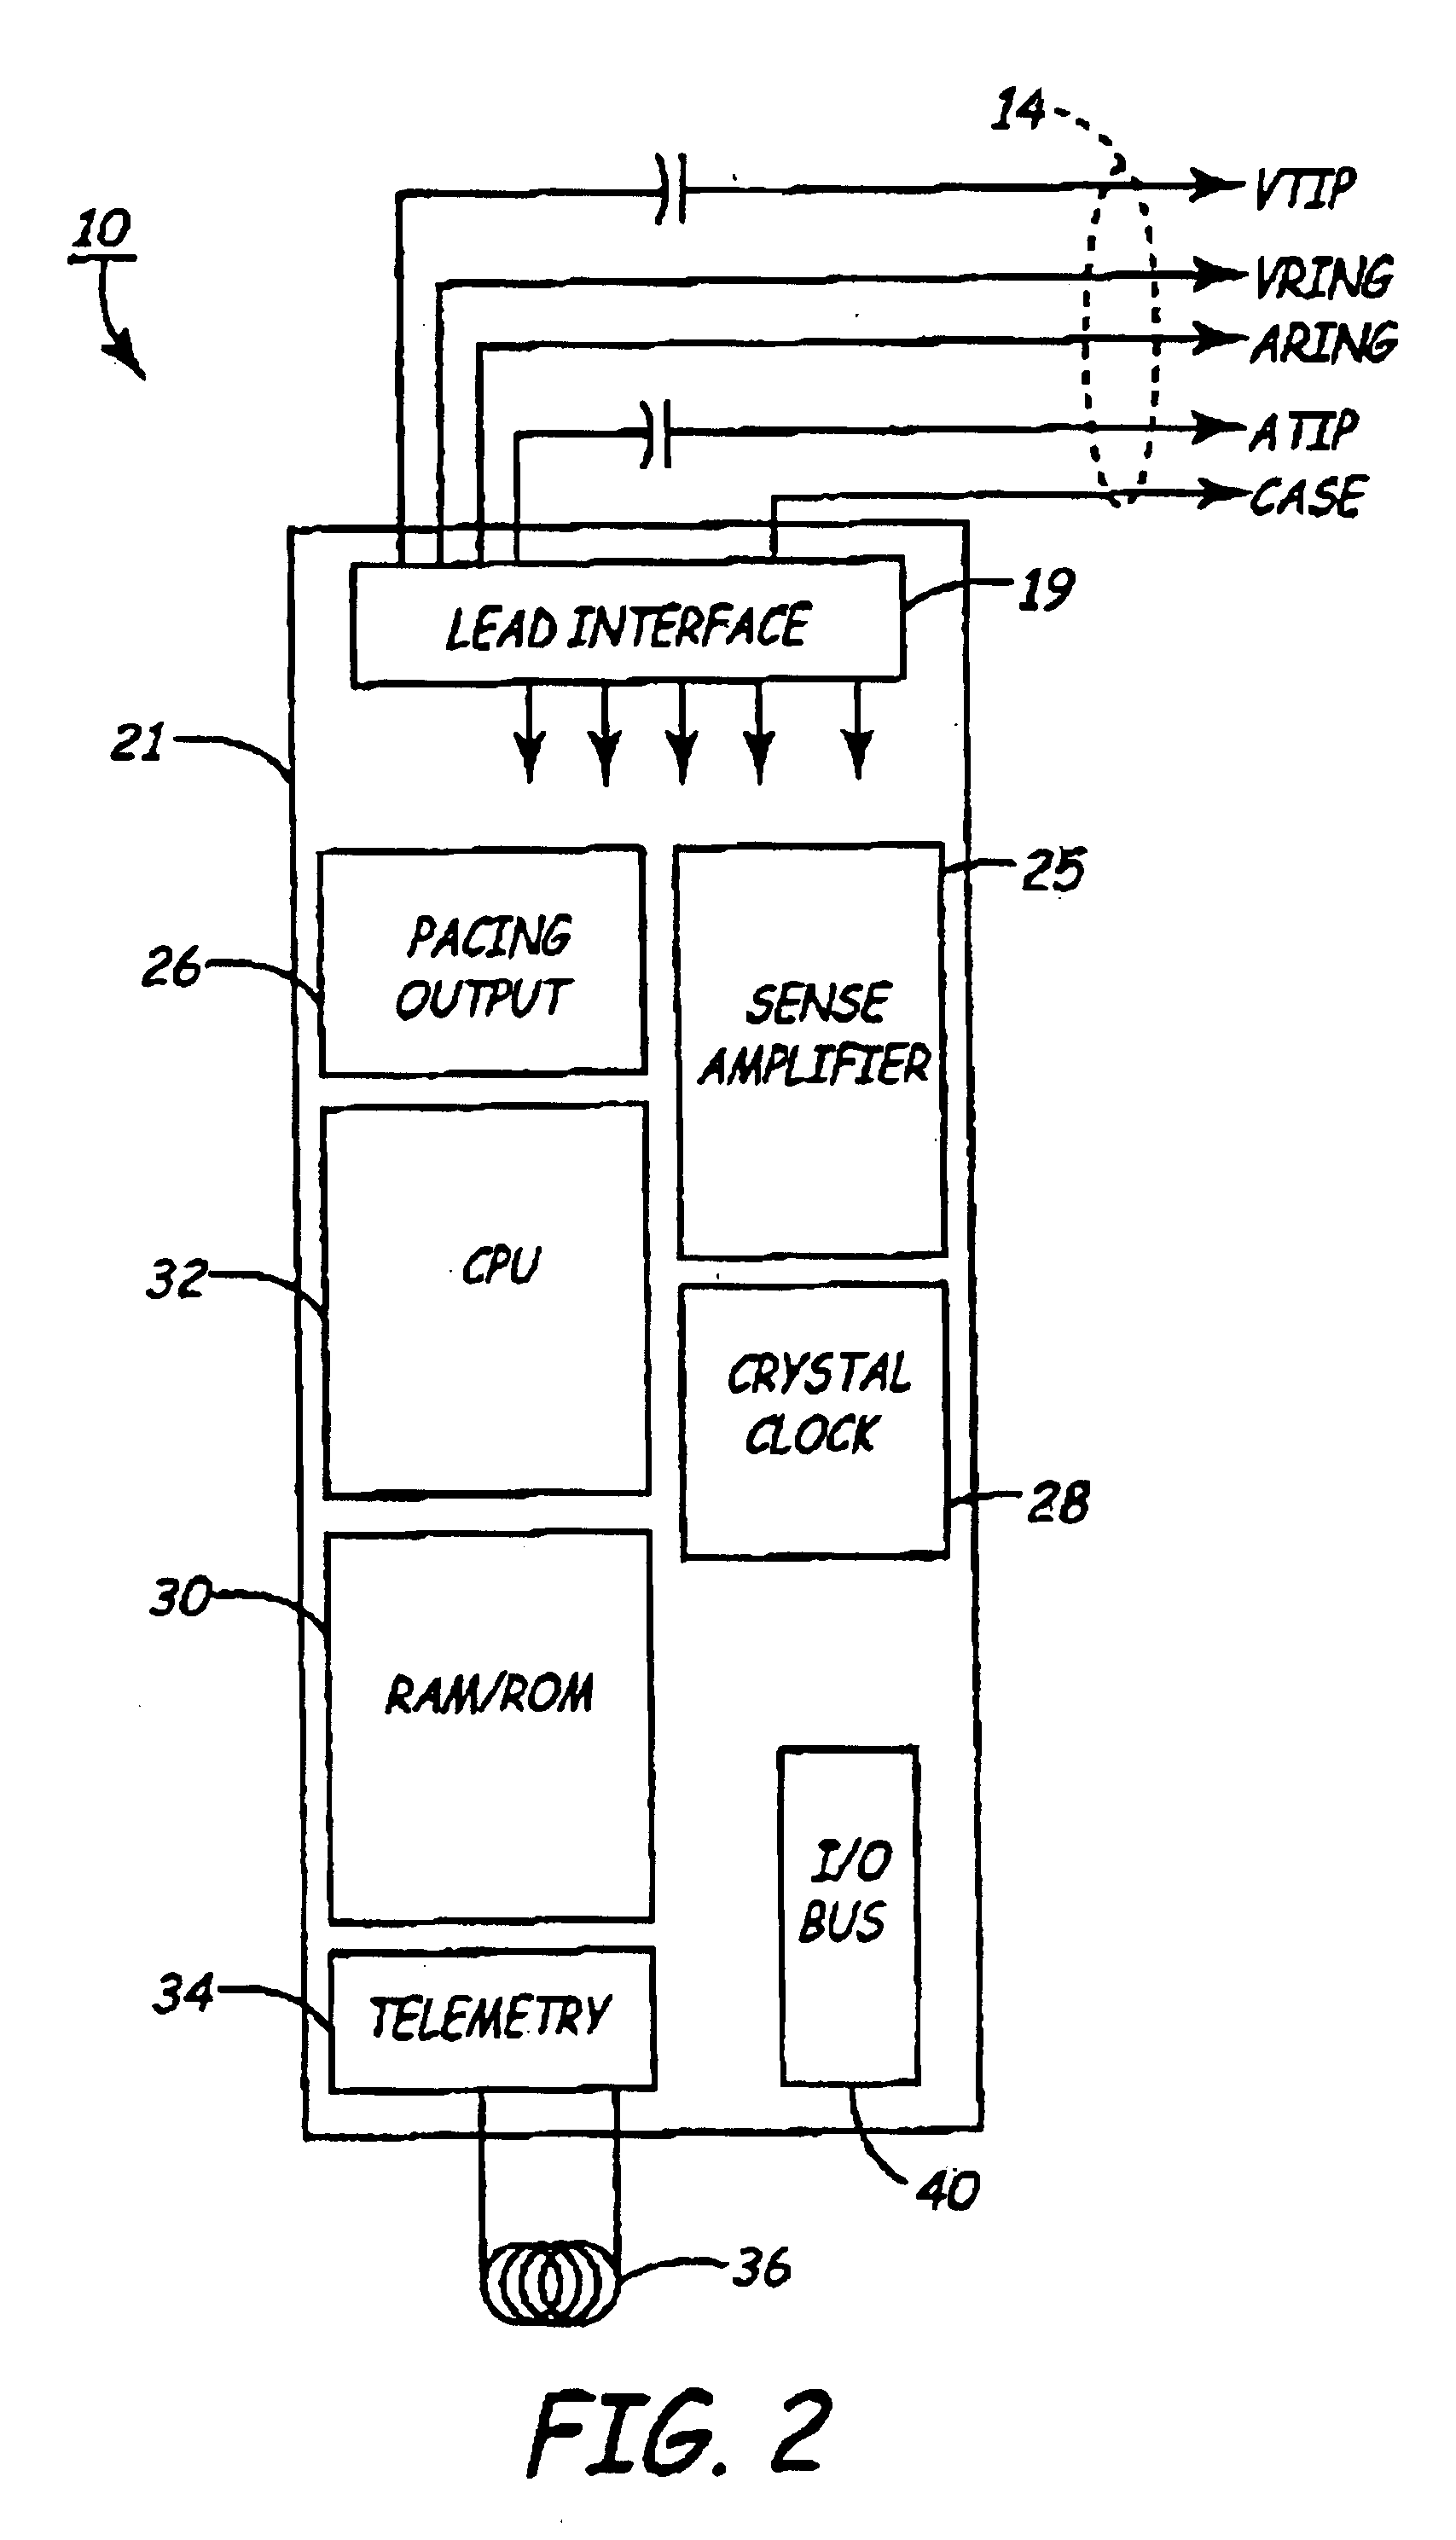 Method for stacking semiconductor die within an implanted medical device